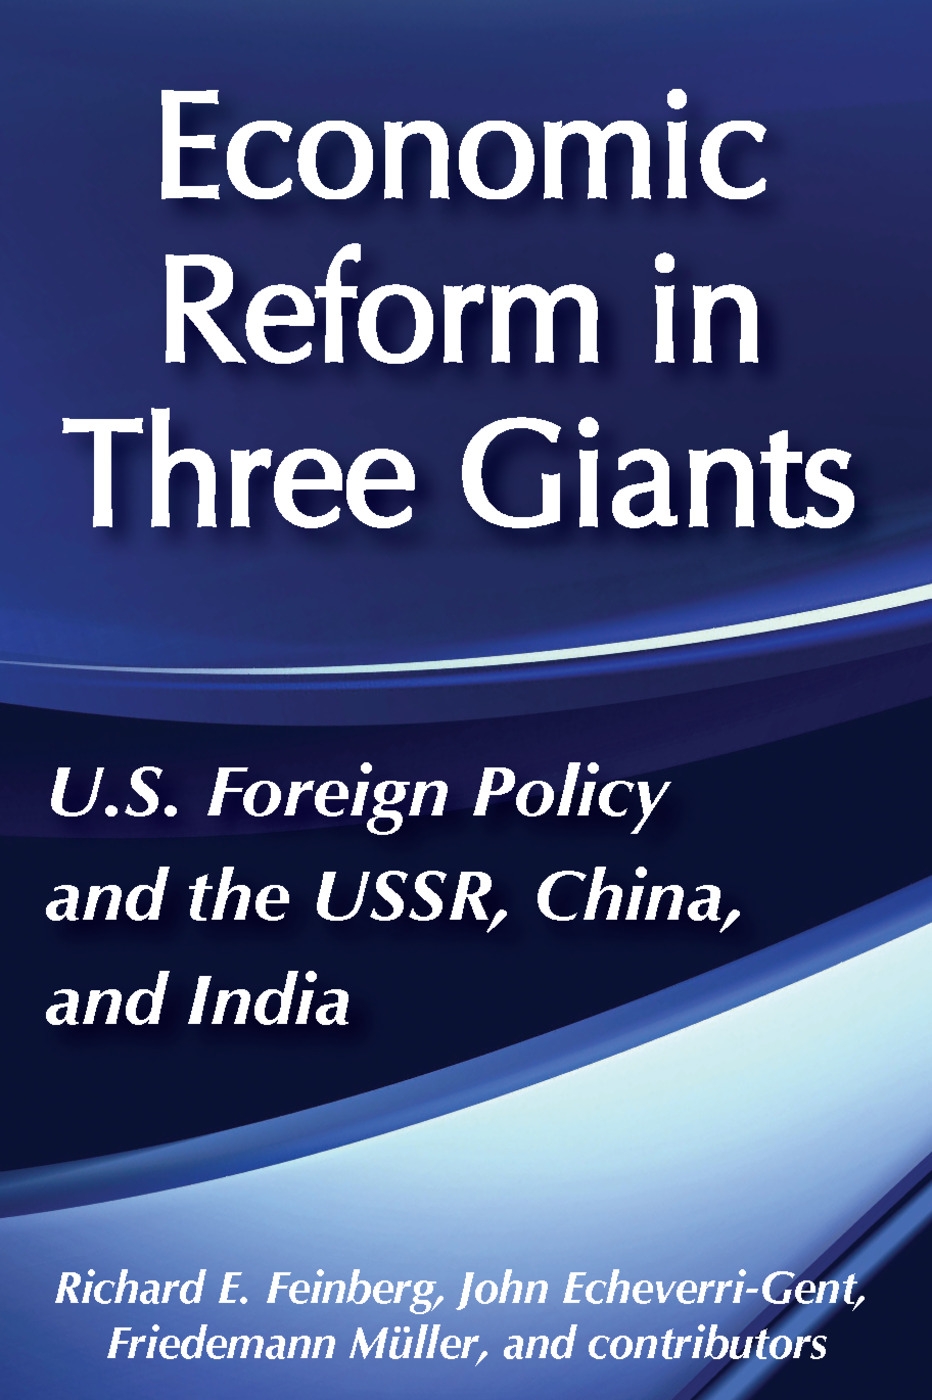 Economic Reform in Three Giants: U.S. Foreign Policy and the Ussr, China and India